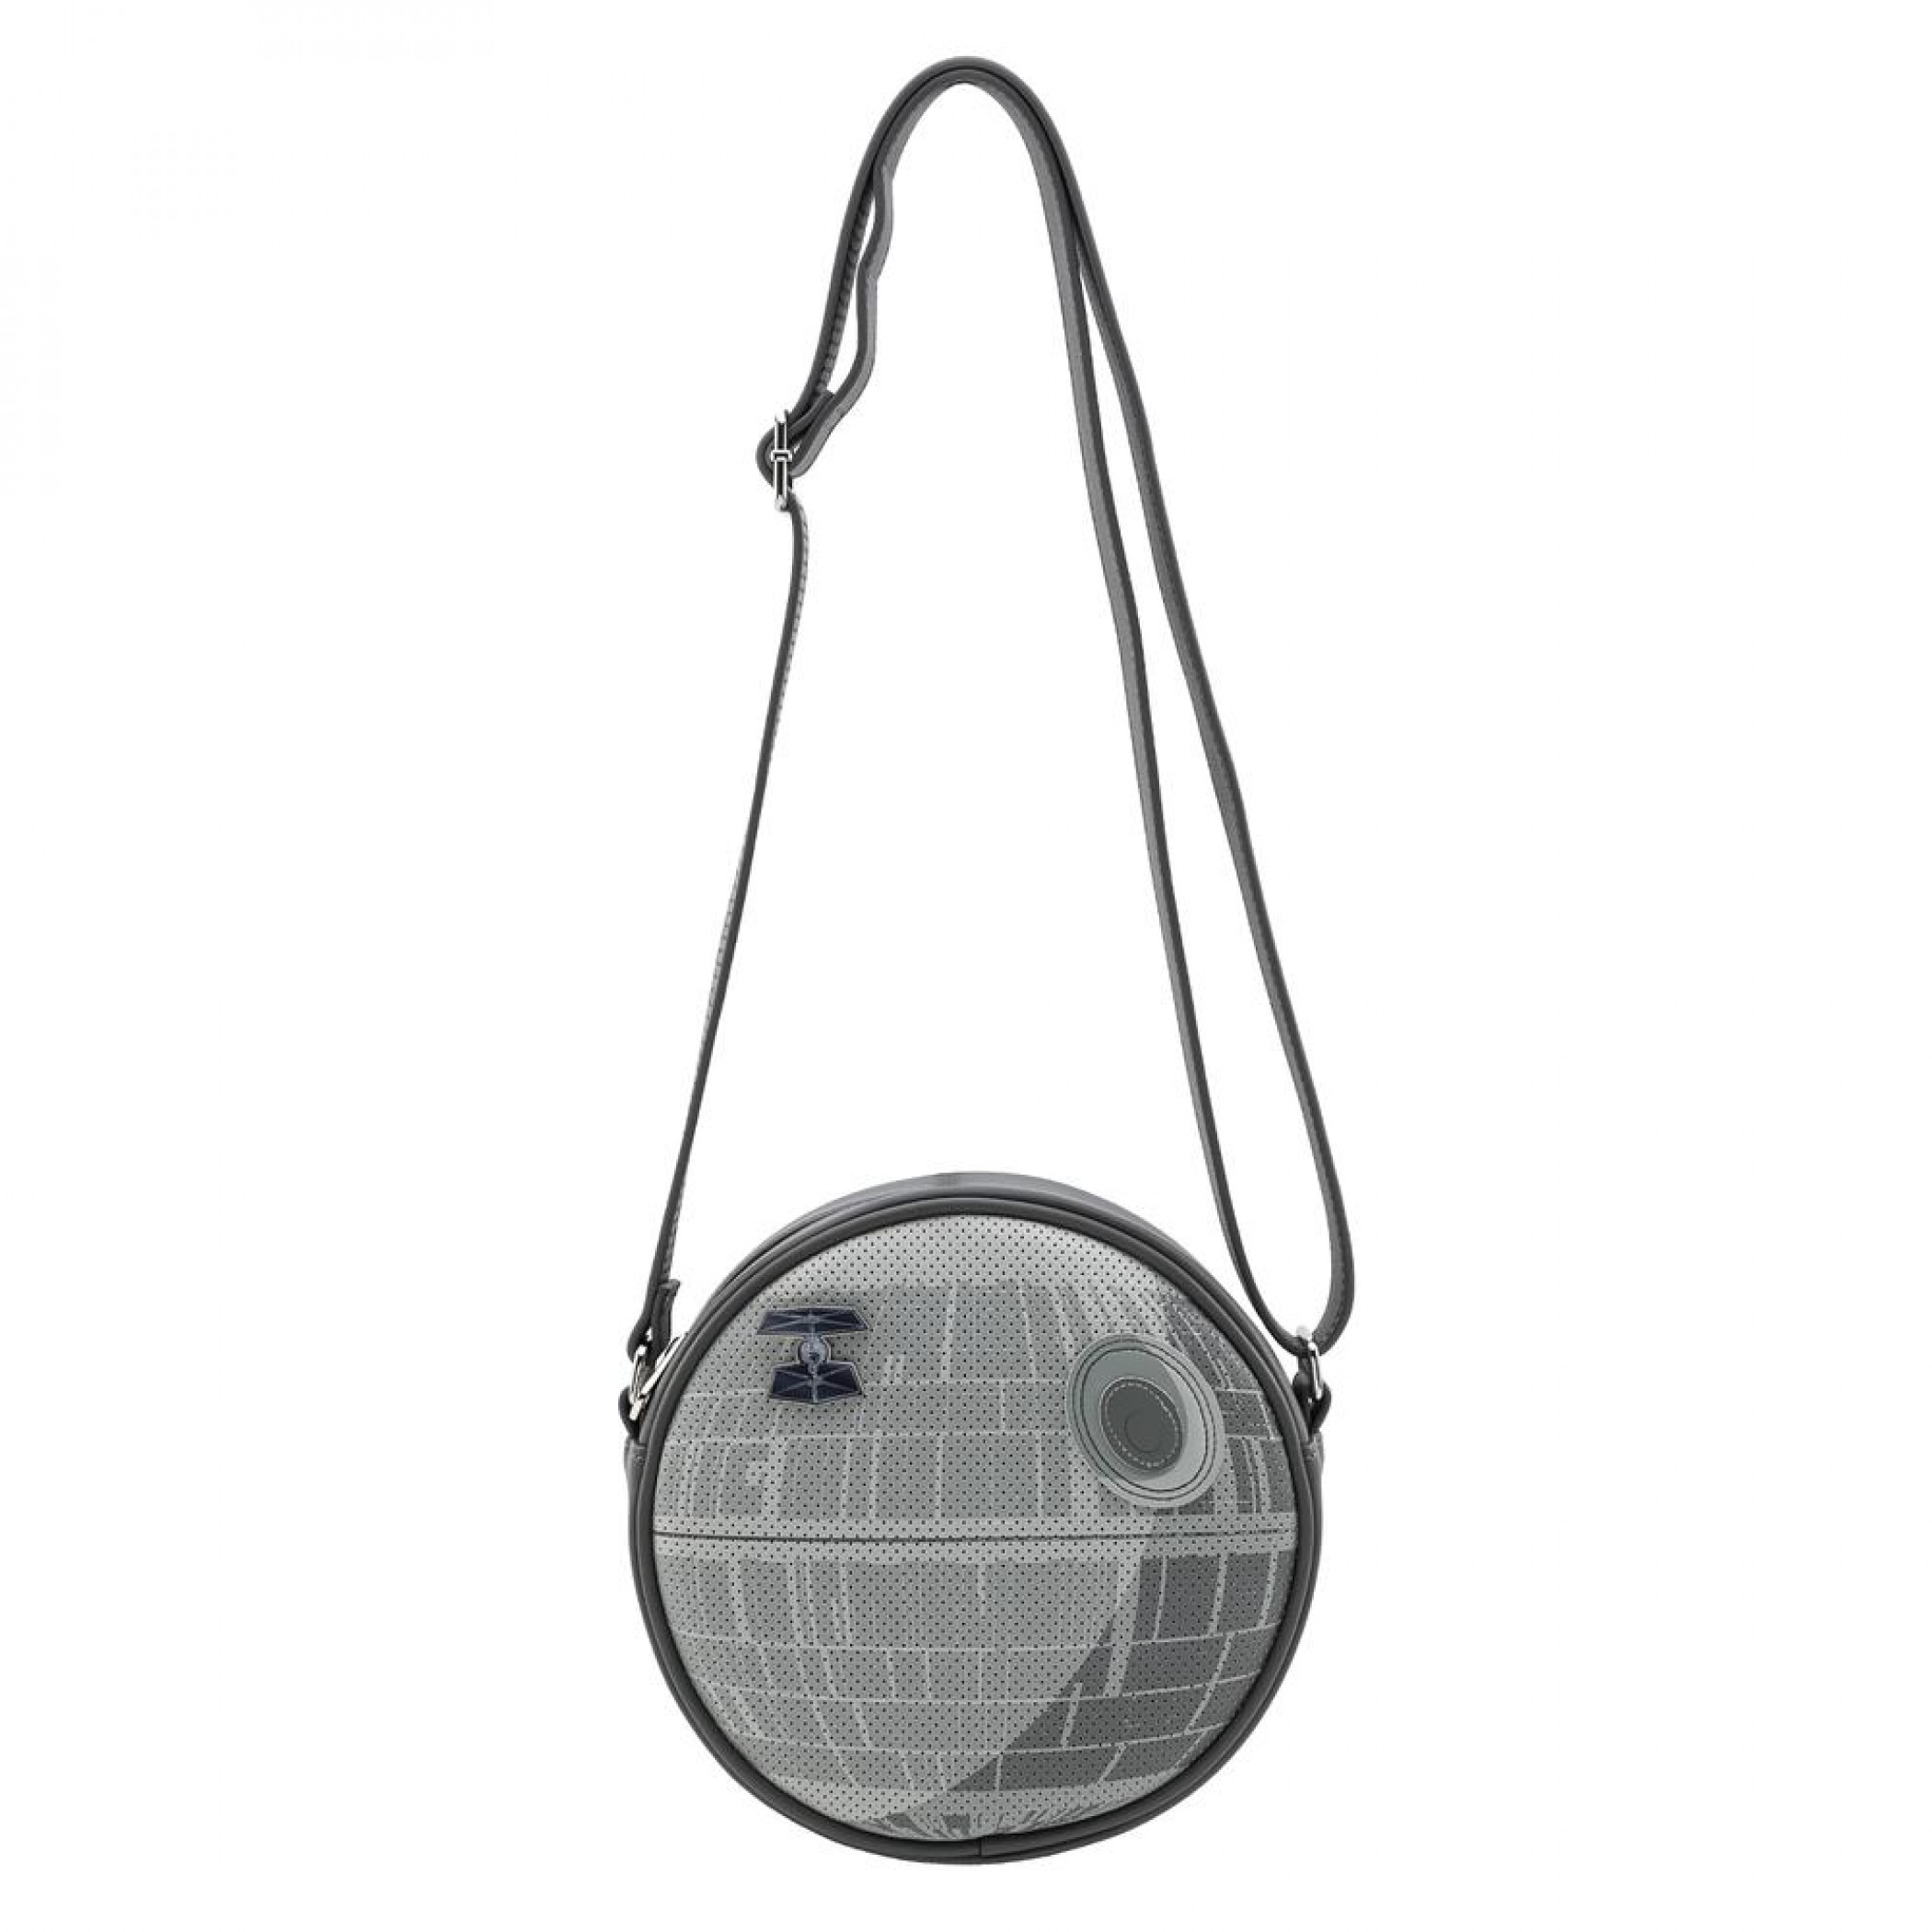 Star Wars Empire 40th Death Star Crossbody Bag with TIE Fighter Pin by Loungefly